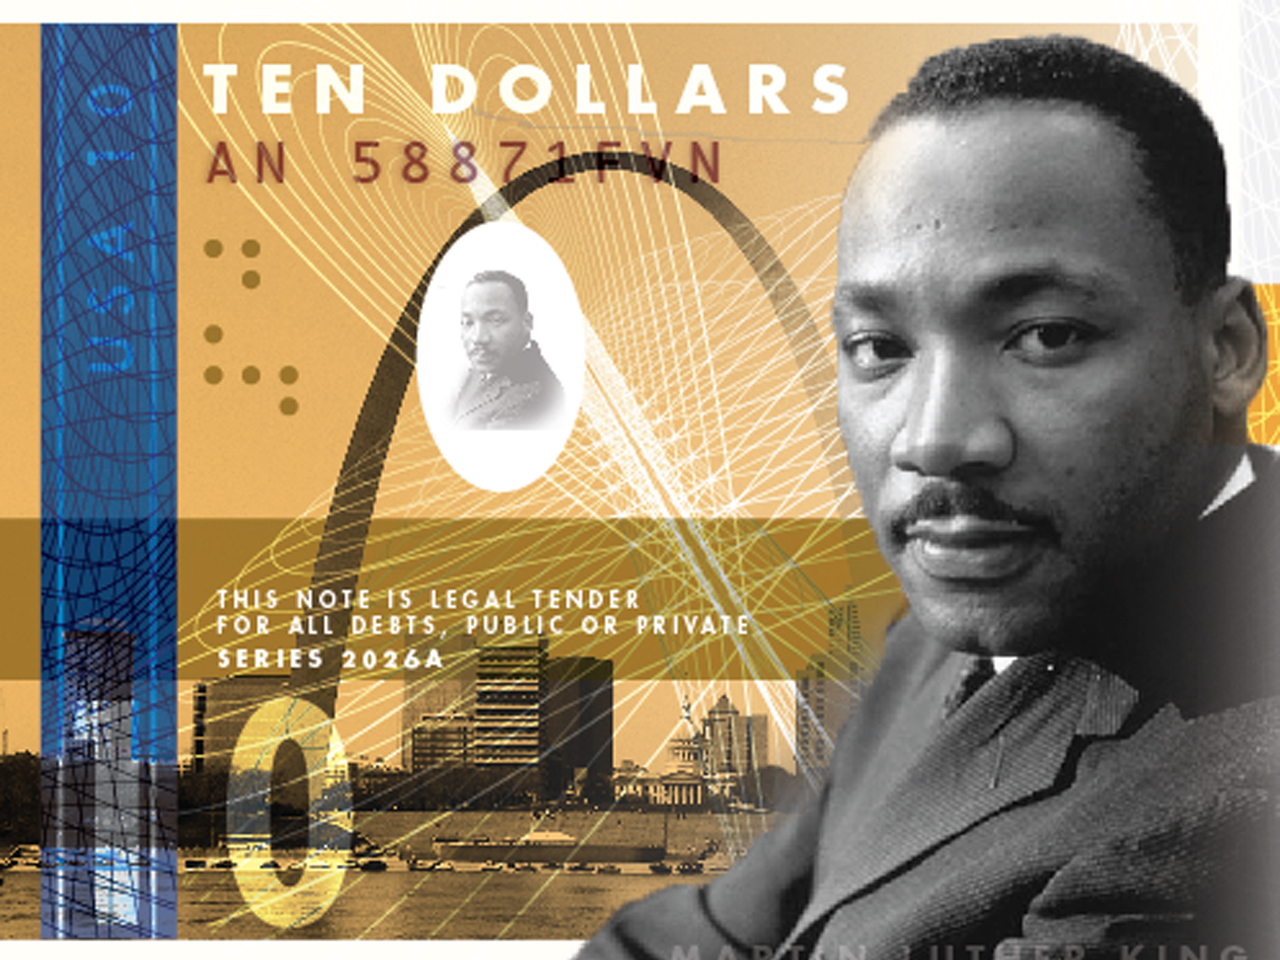 Martin Luther King Jr. - Alternative designs for U.S. currency - Pictures - CBS News